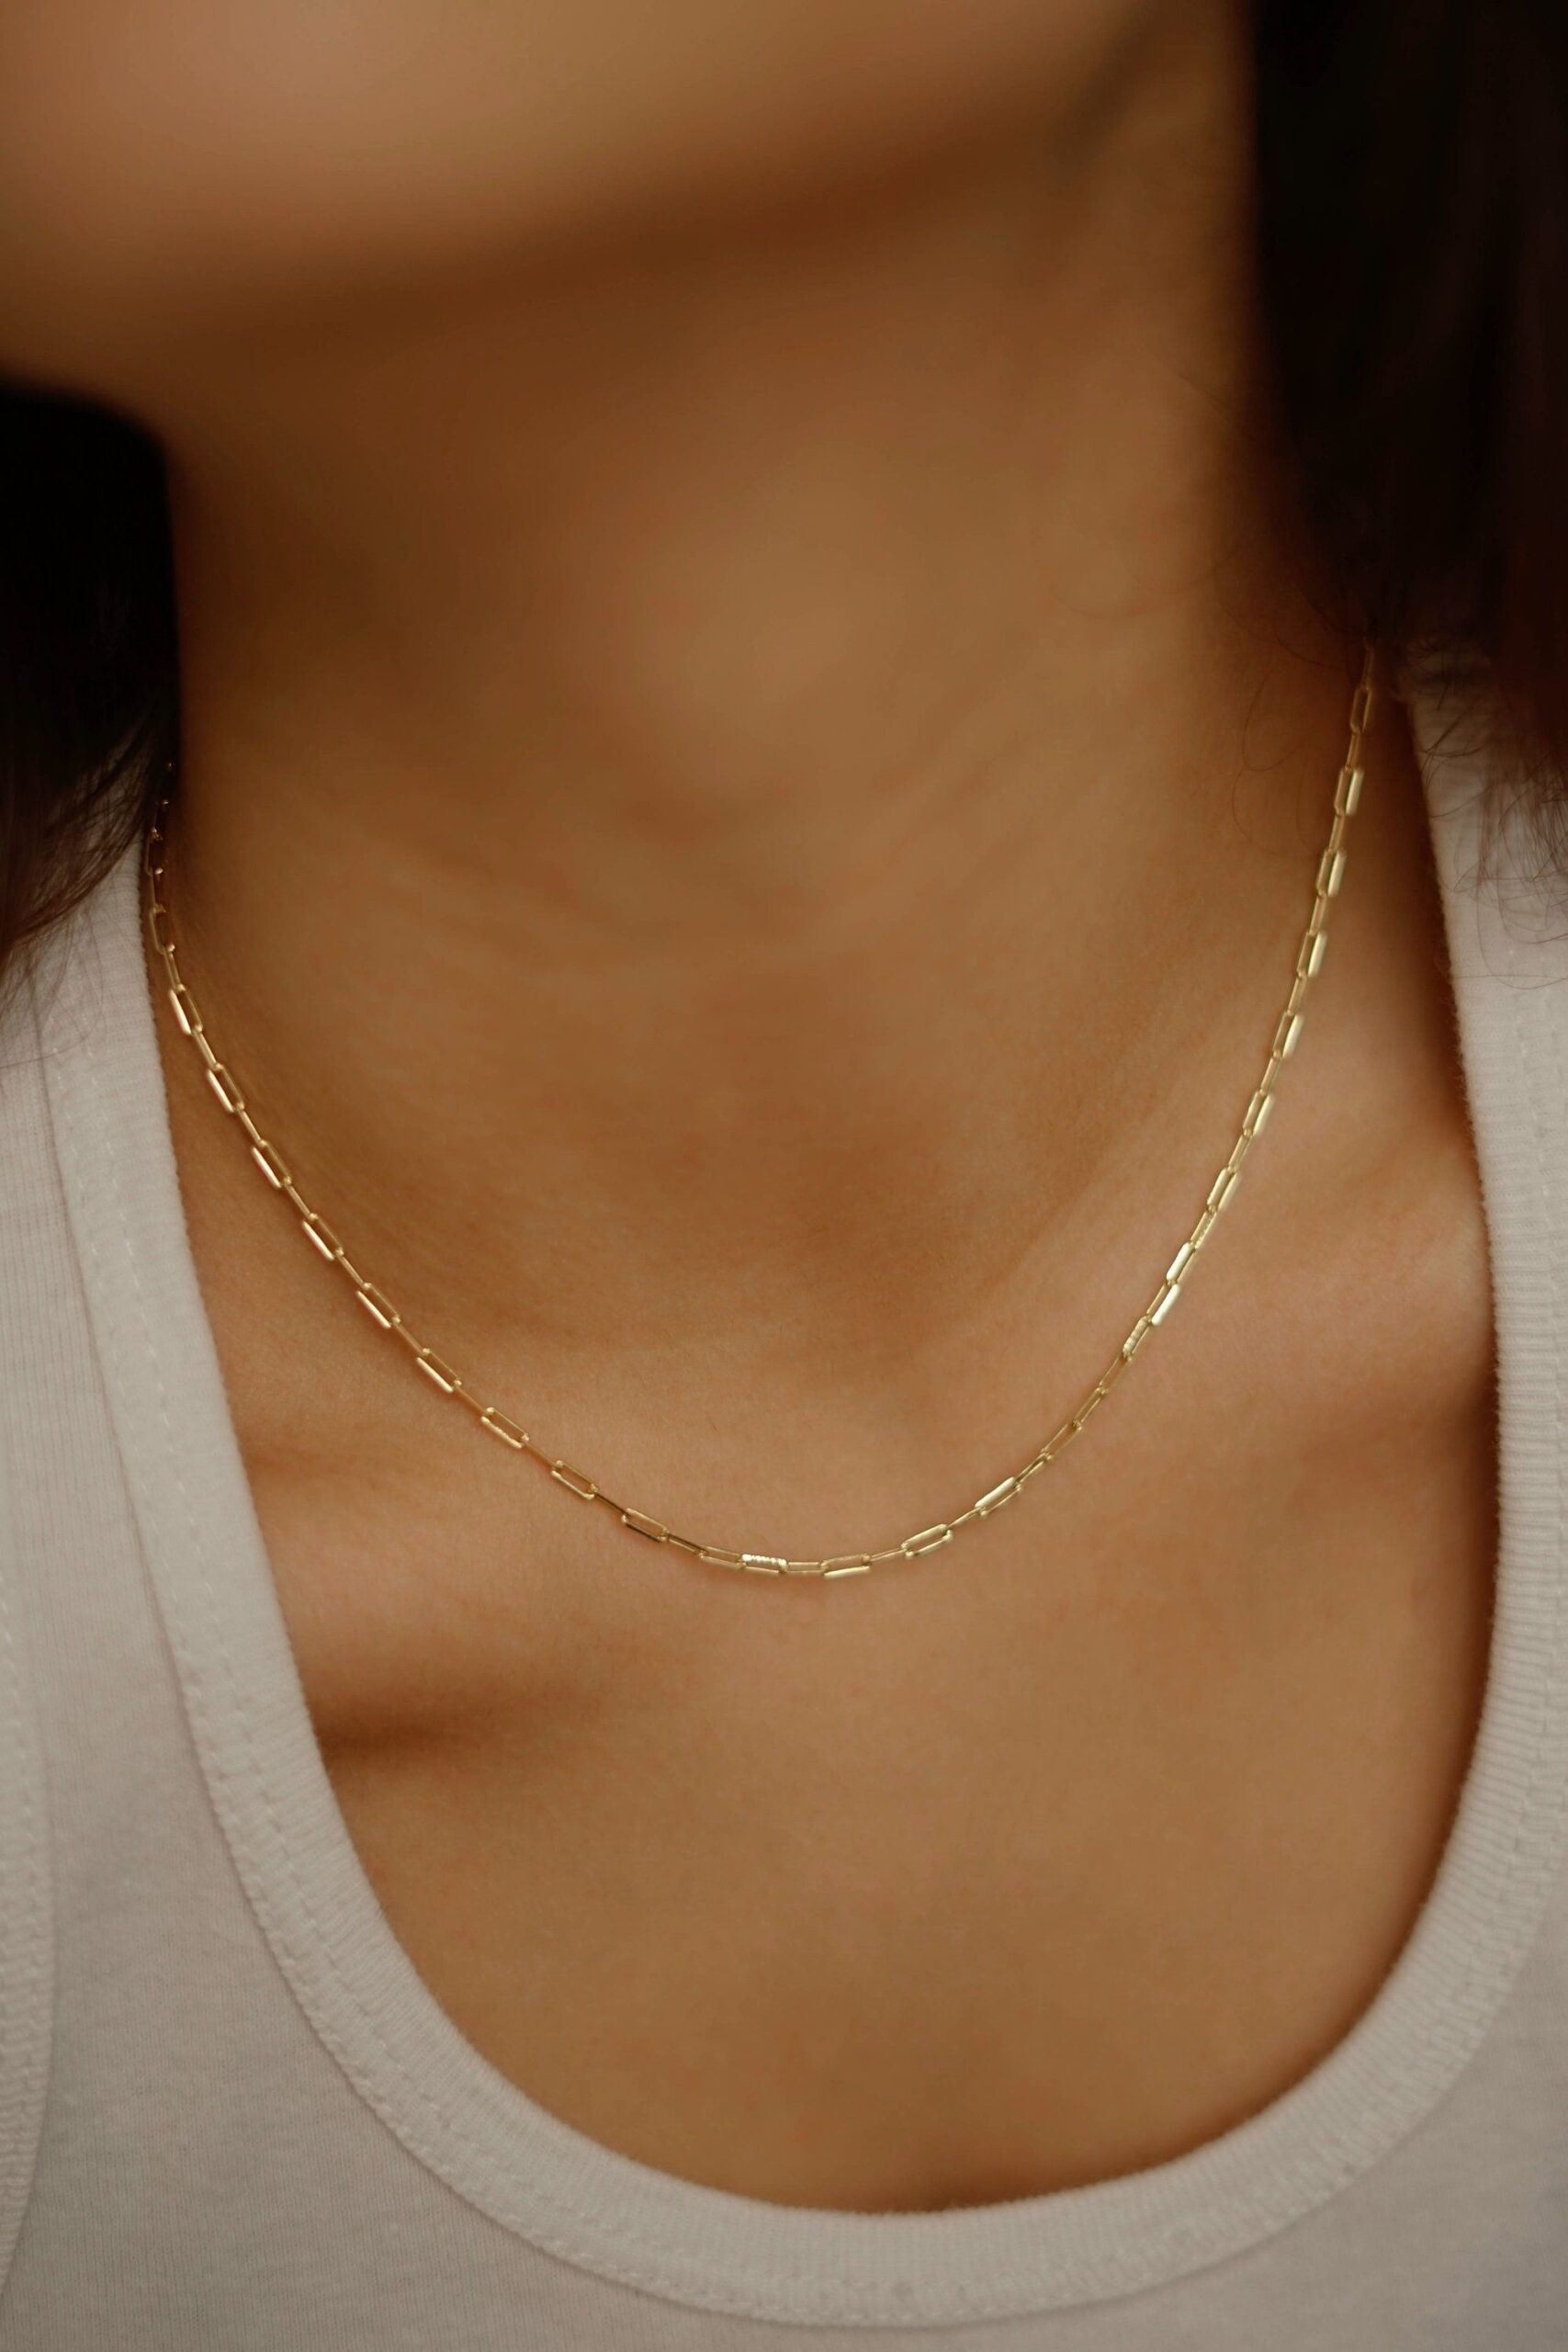 Timeless Elegance: Gold Necklace Designs That Enhance Your Beauty